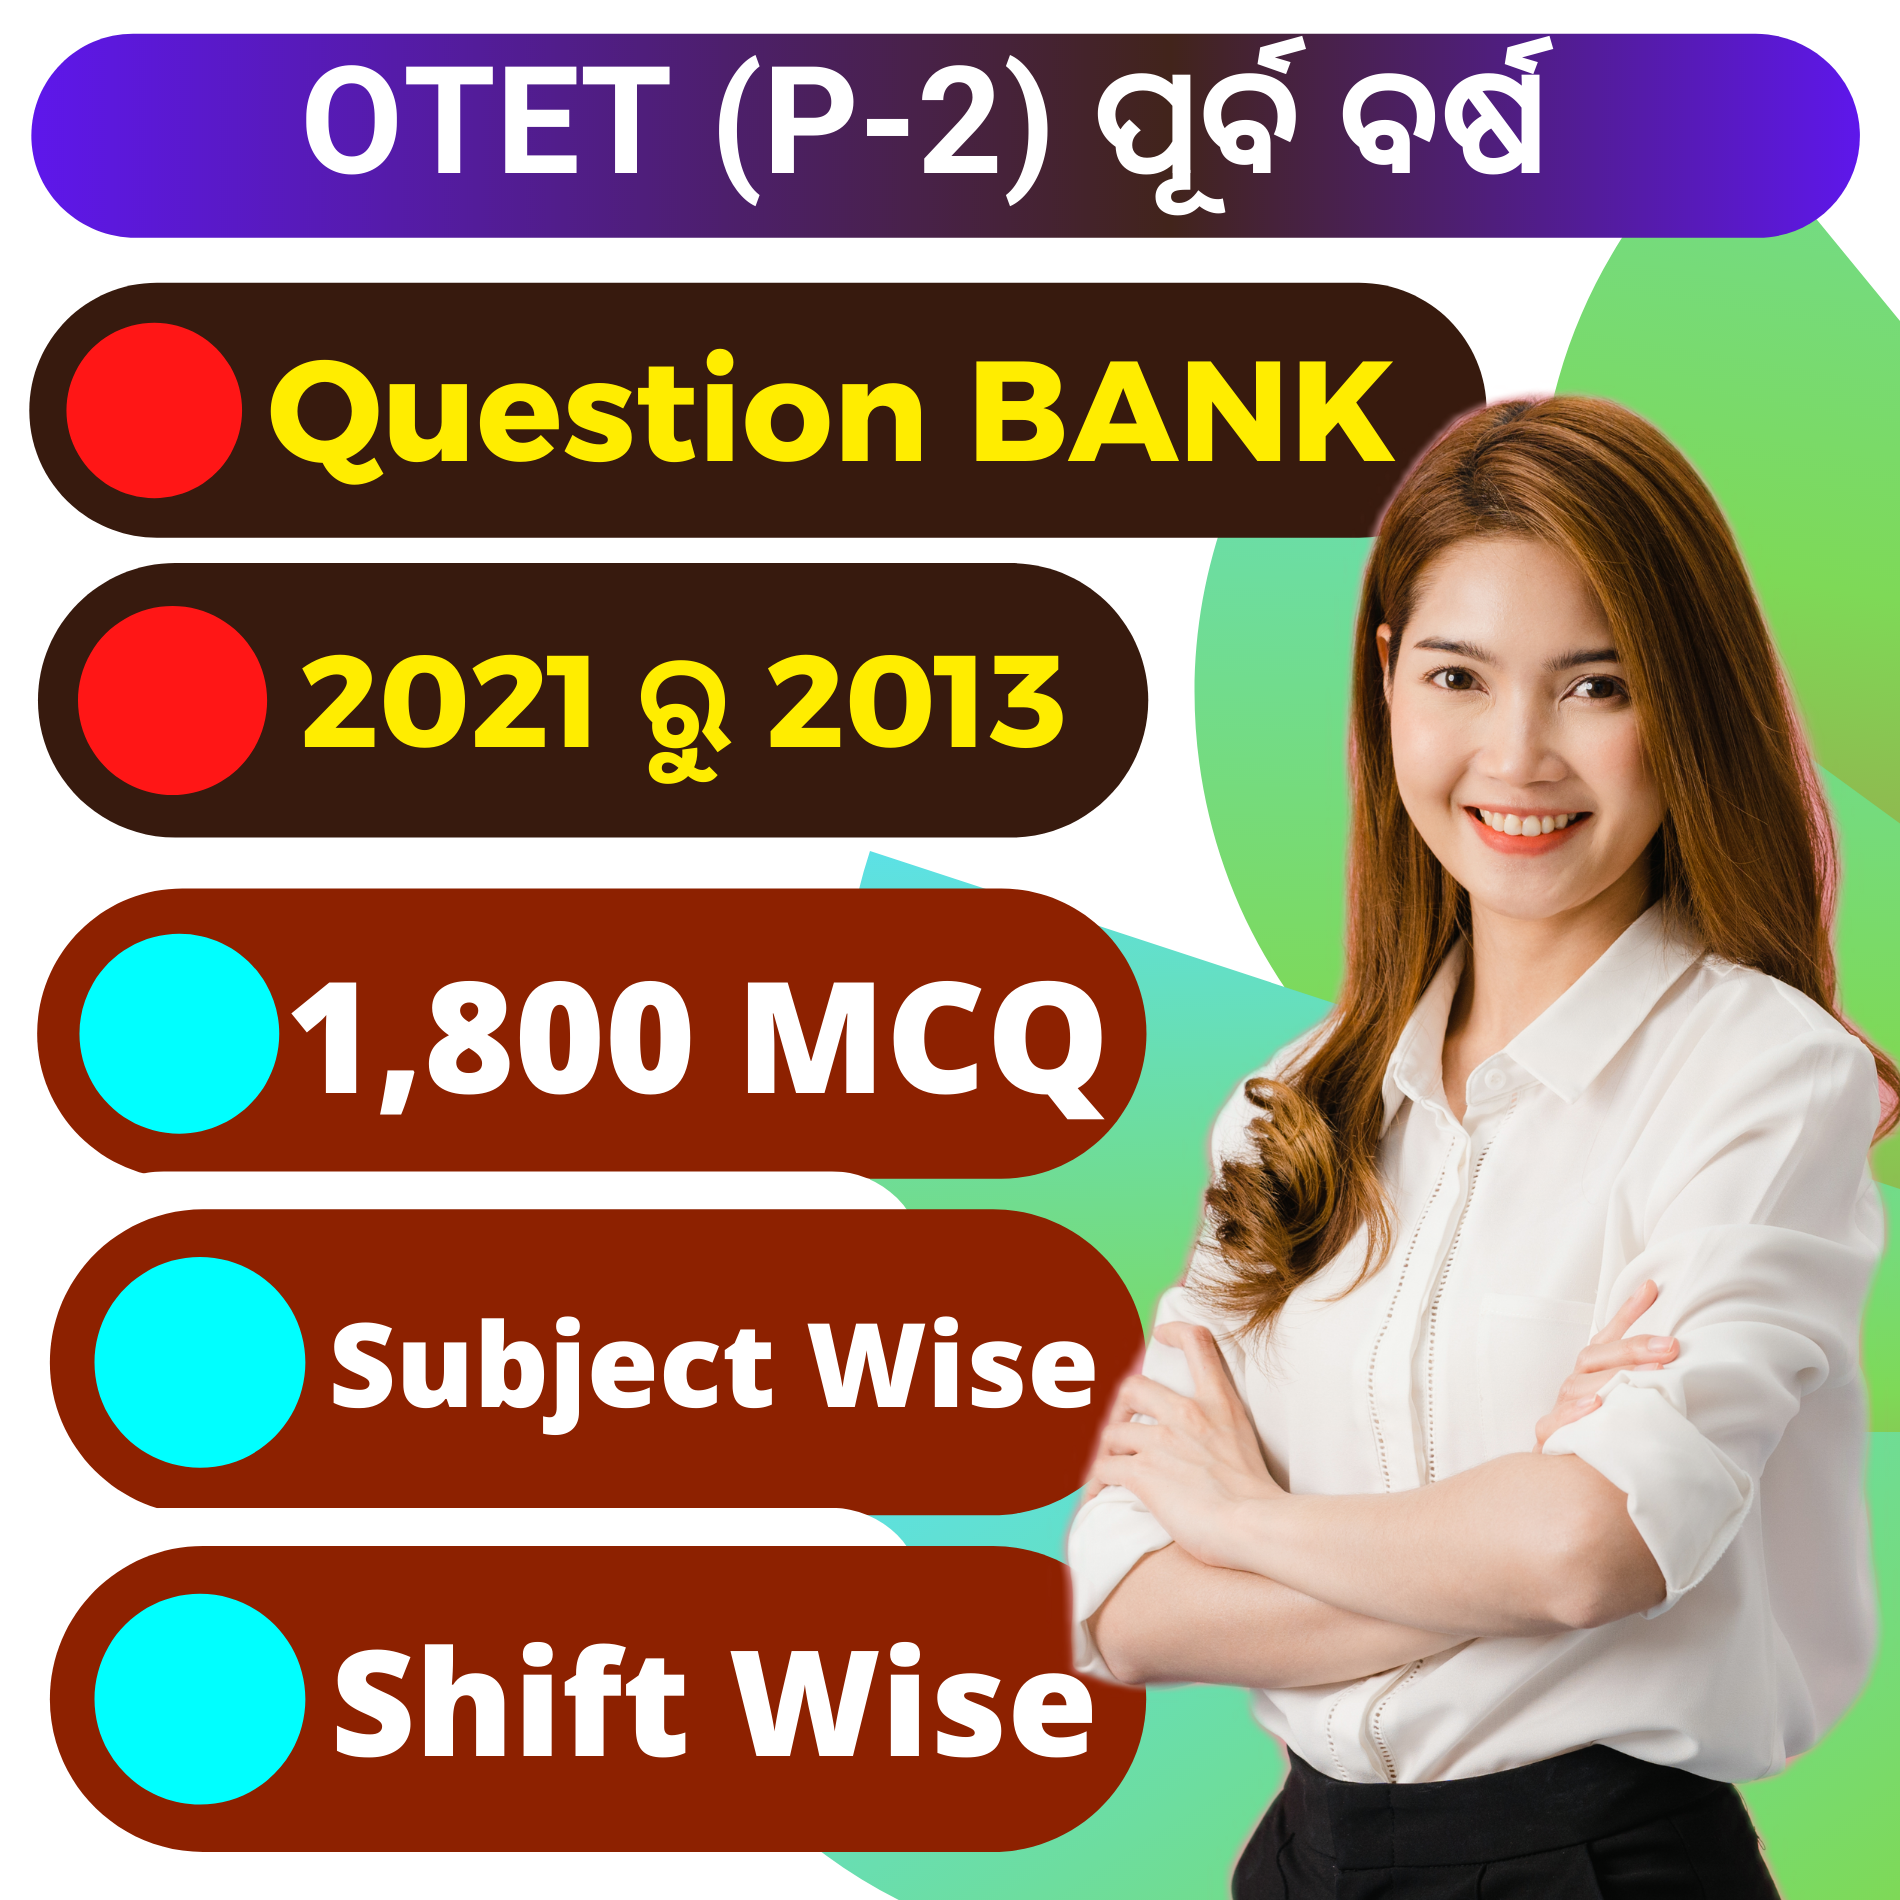 C- OTET P-2 EXAM QUESTION BANK (SUBJECT WISE &amp; SHIFT WISE PREVIOUS YEAR QUESTIONS &amp; ANSWER 2021 To 2013) 